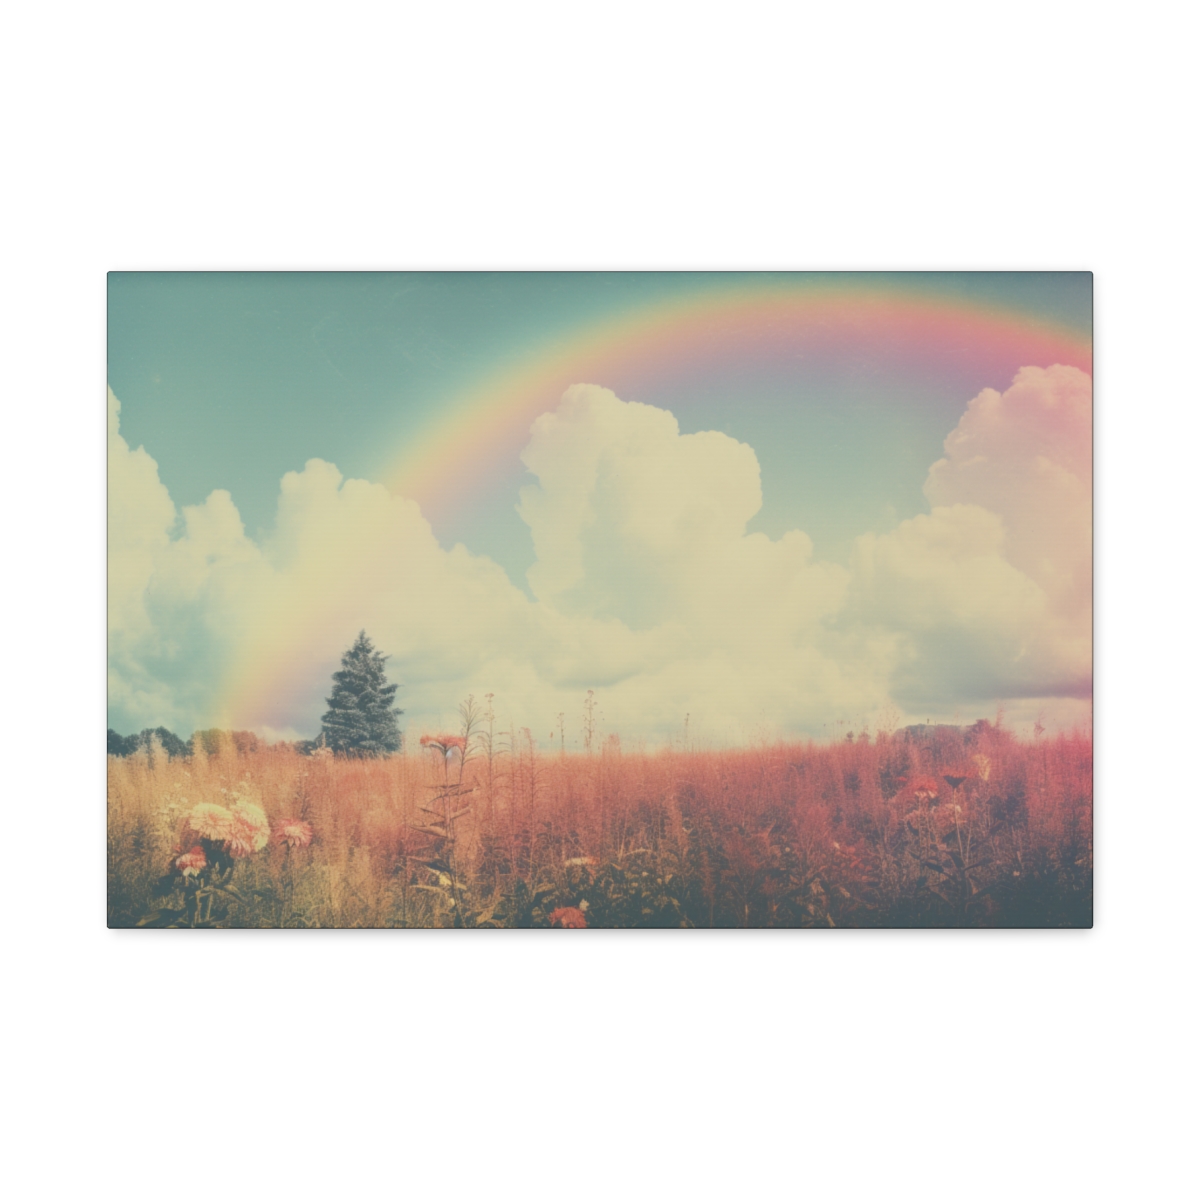 Dreamy Ethereal Rainbow Art: Spectral Reverie